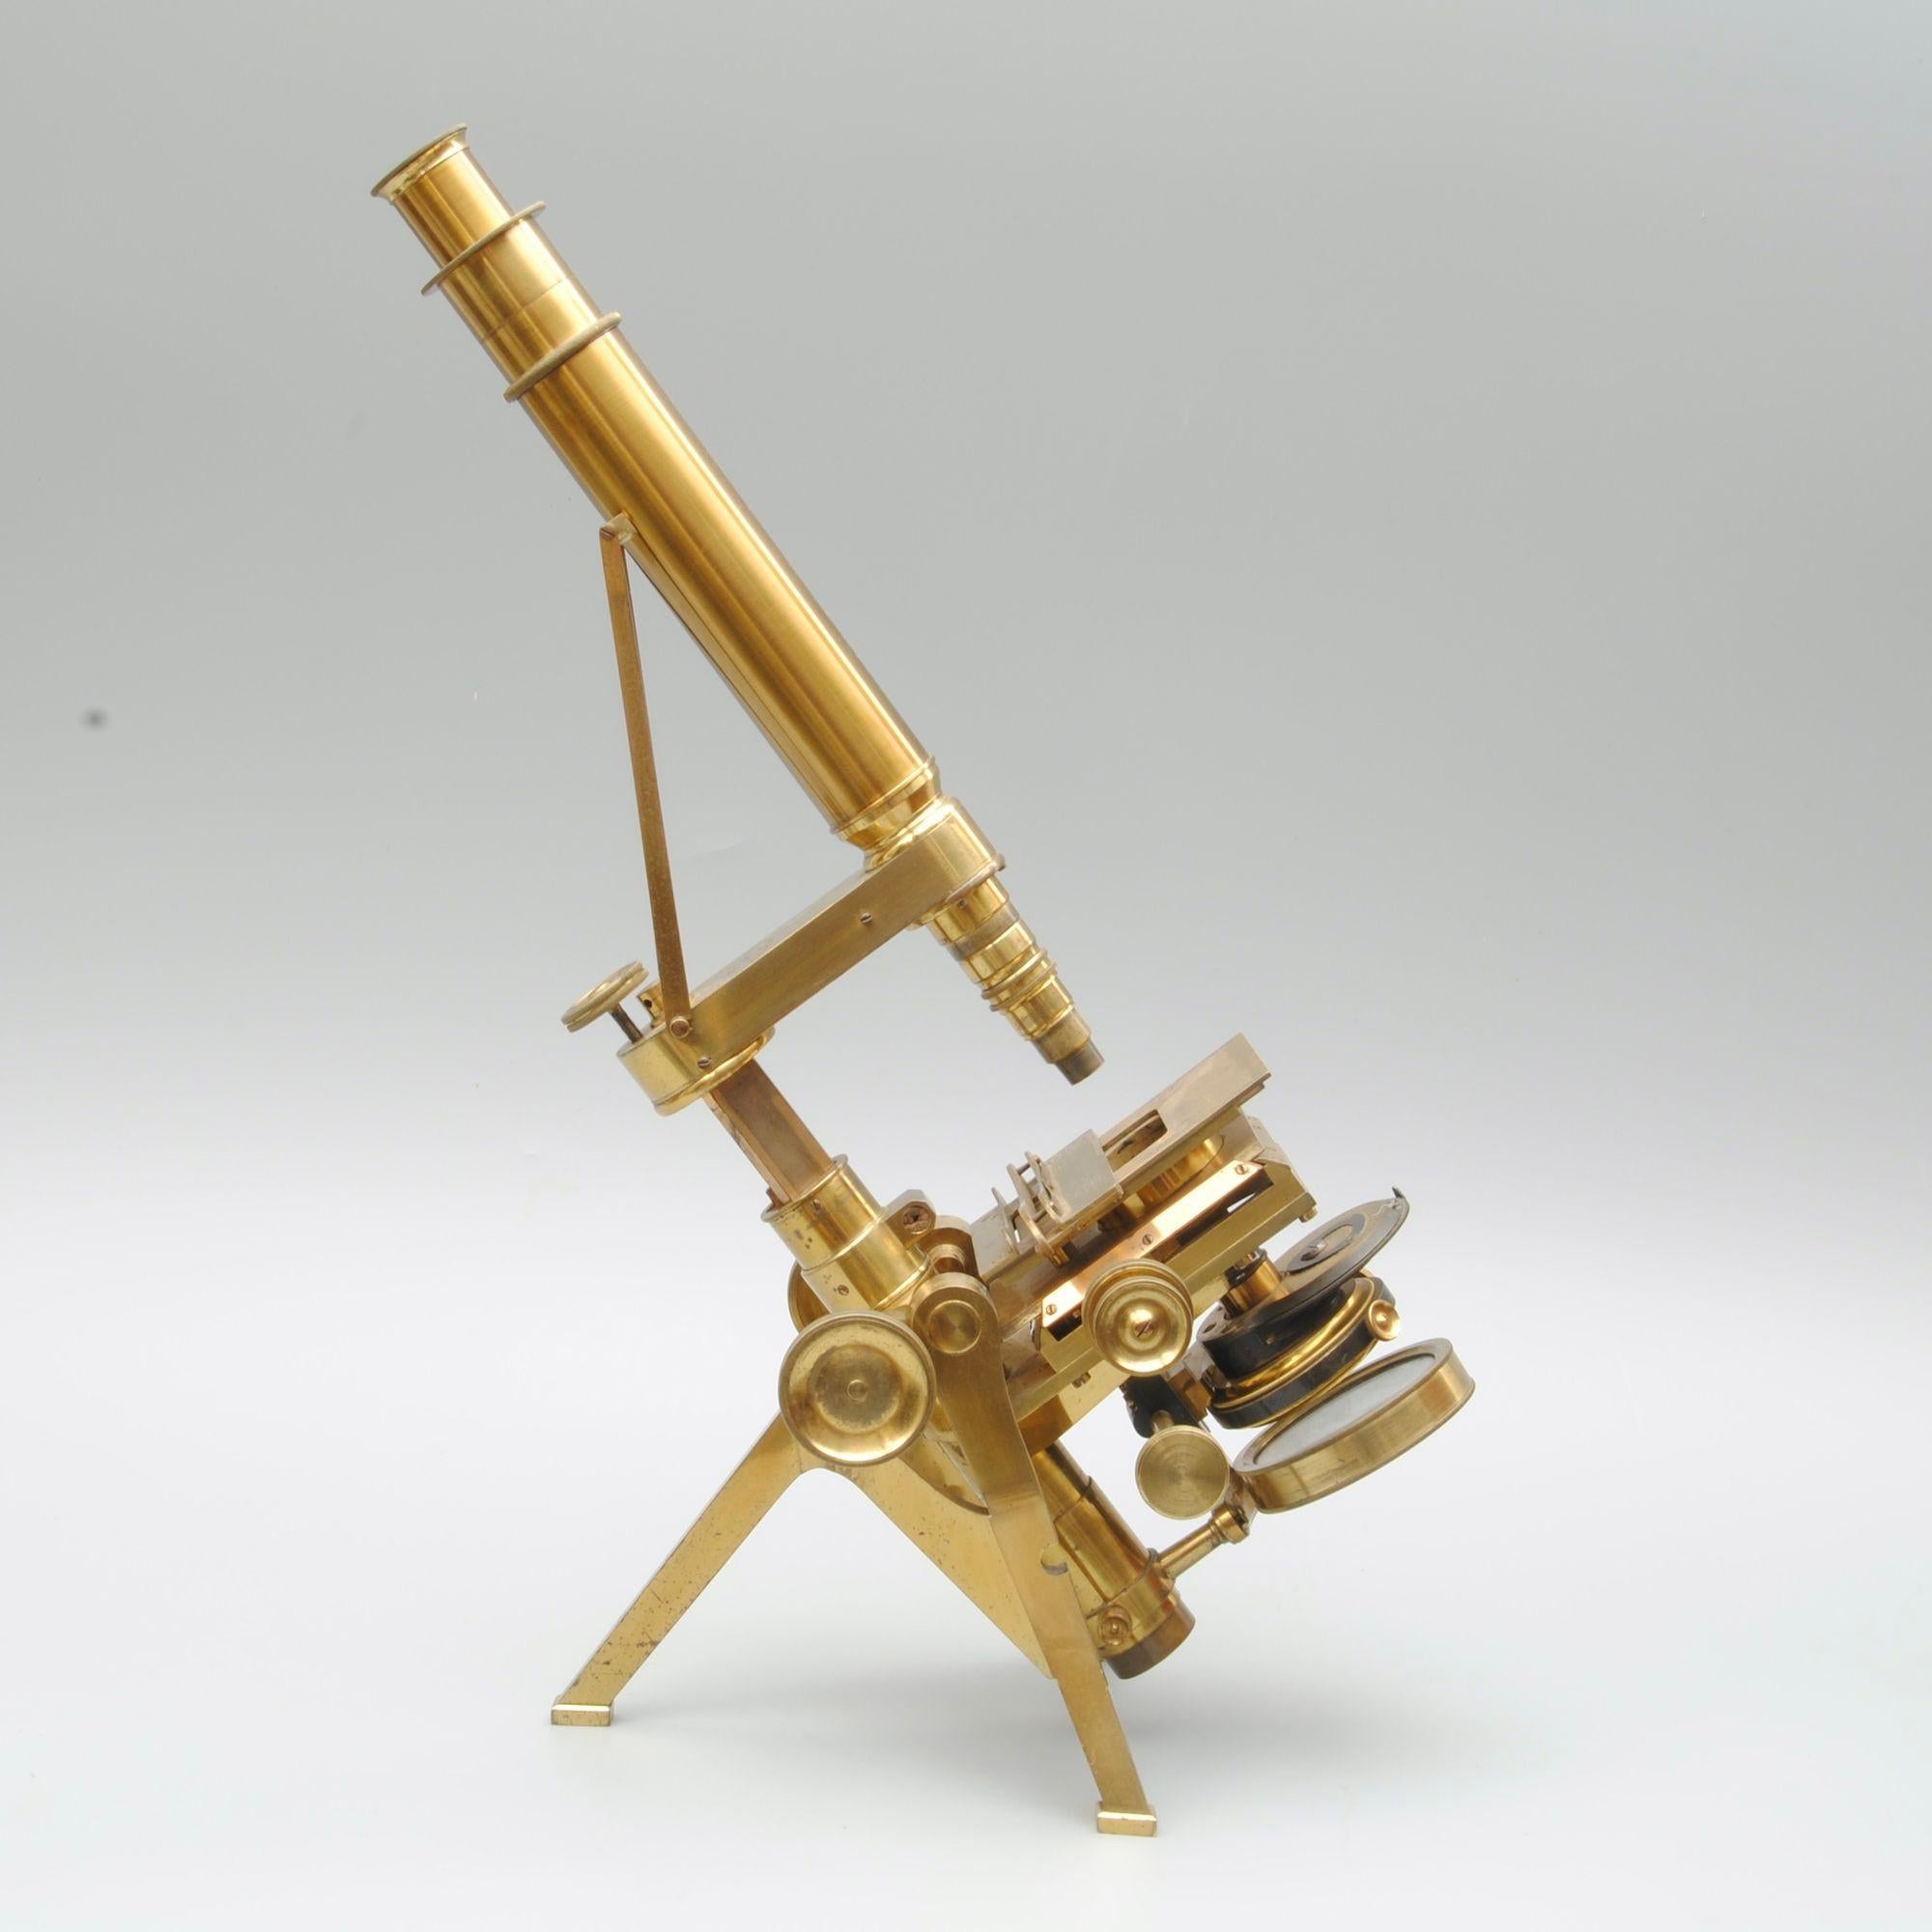 A good example of a Number 3 model microscope retailed by Carpenter and Westley, London in the original fine quality mahogany case. It has a signed Powell and Lealand achromatic condenser and just the accessories as illustrated in the images of the